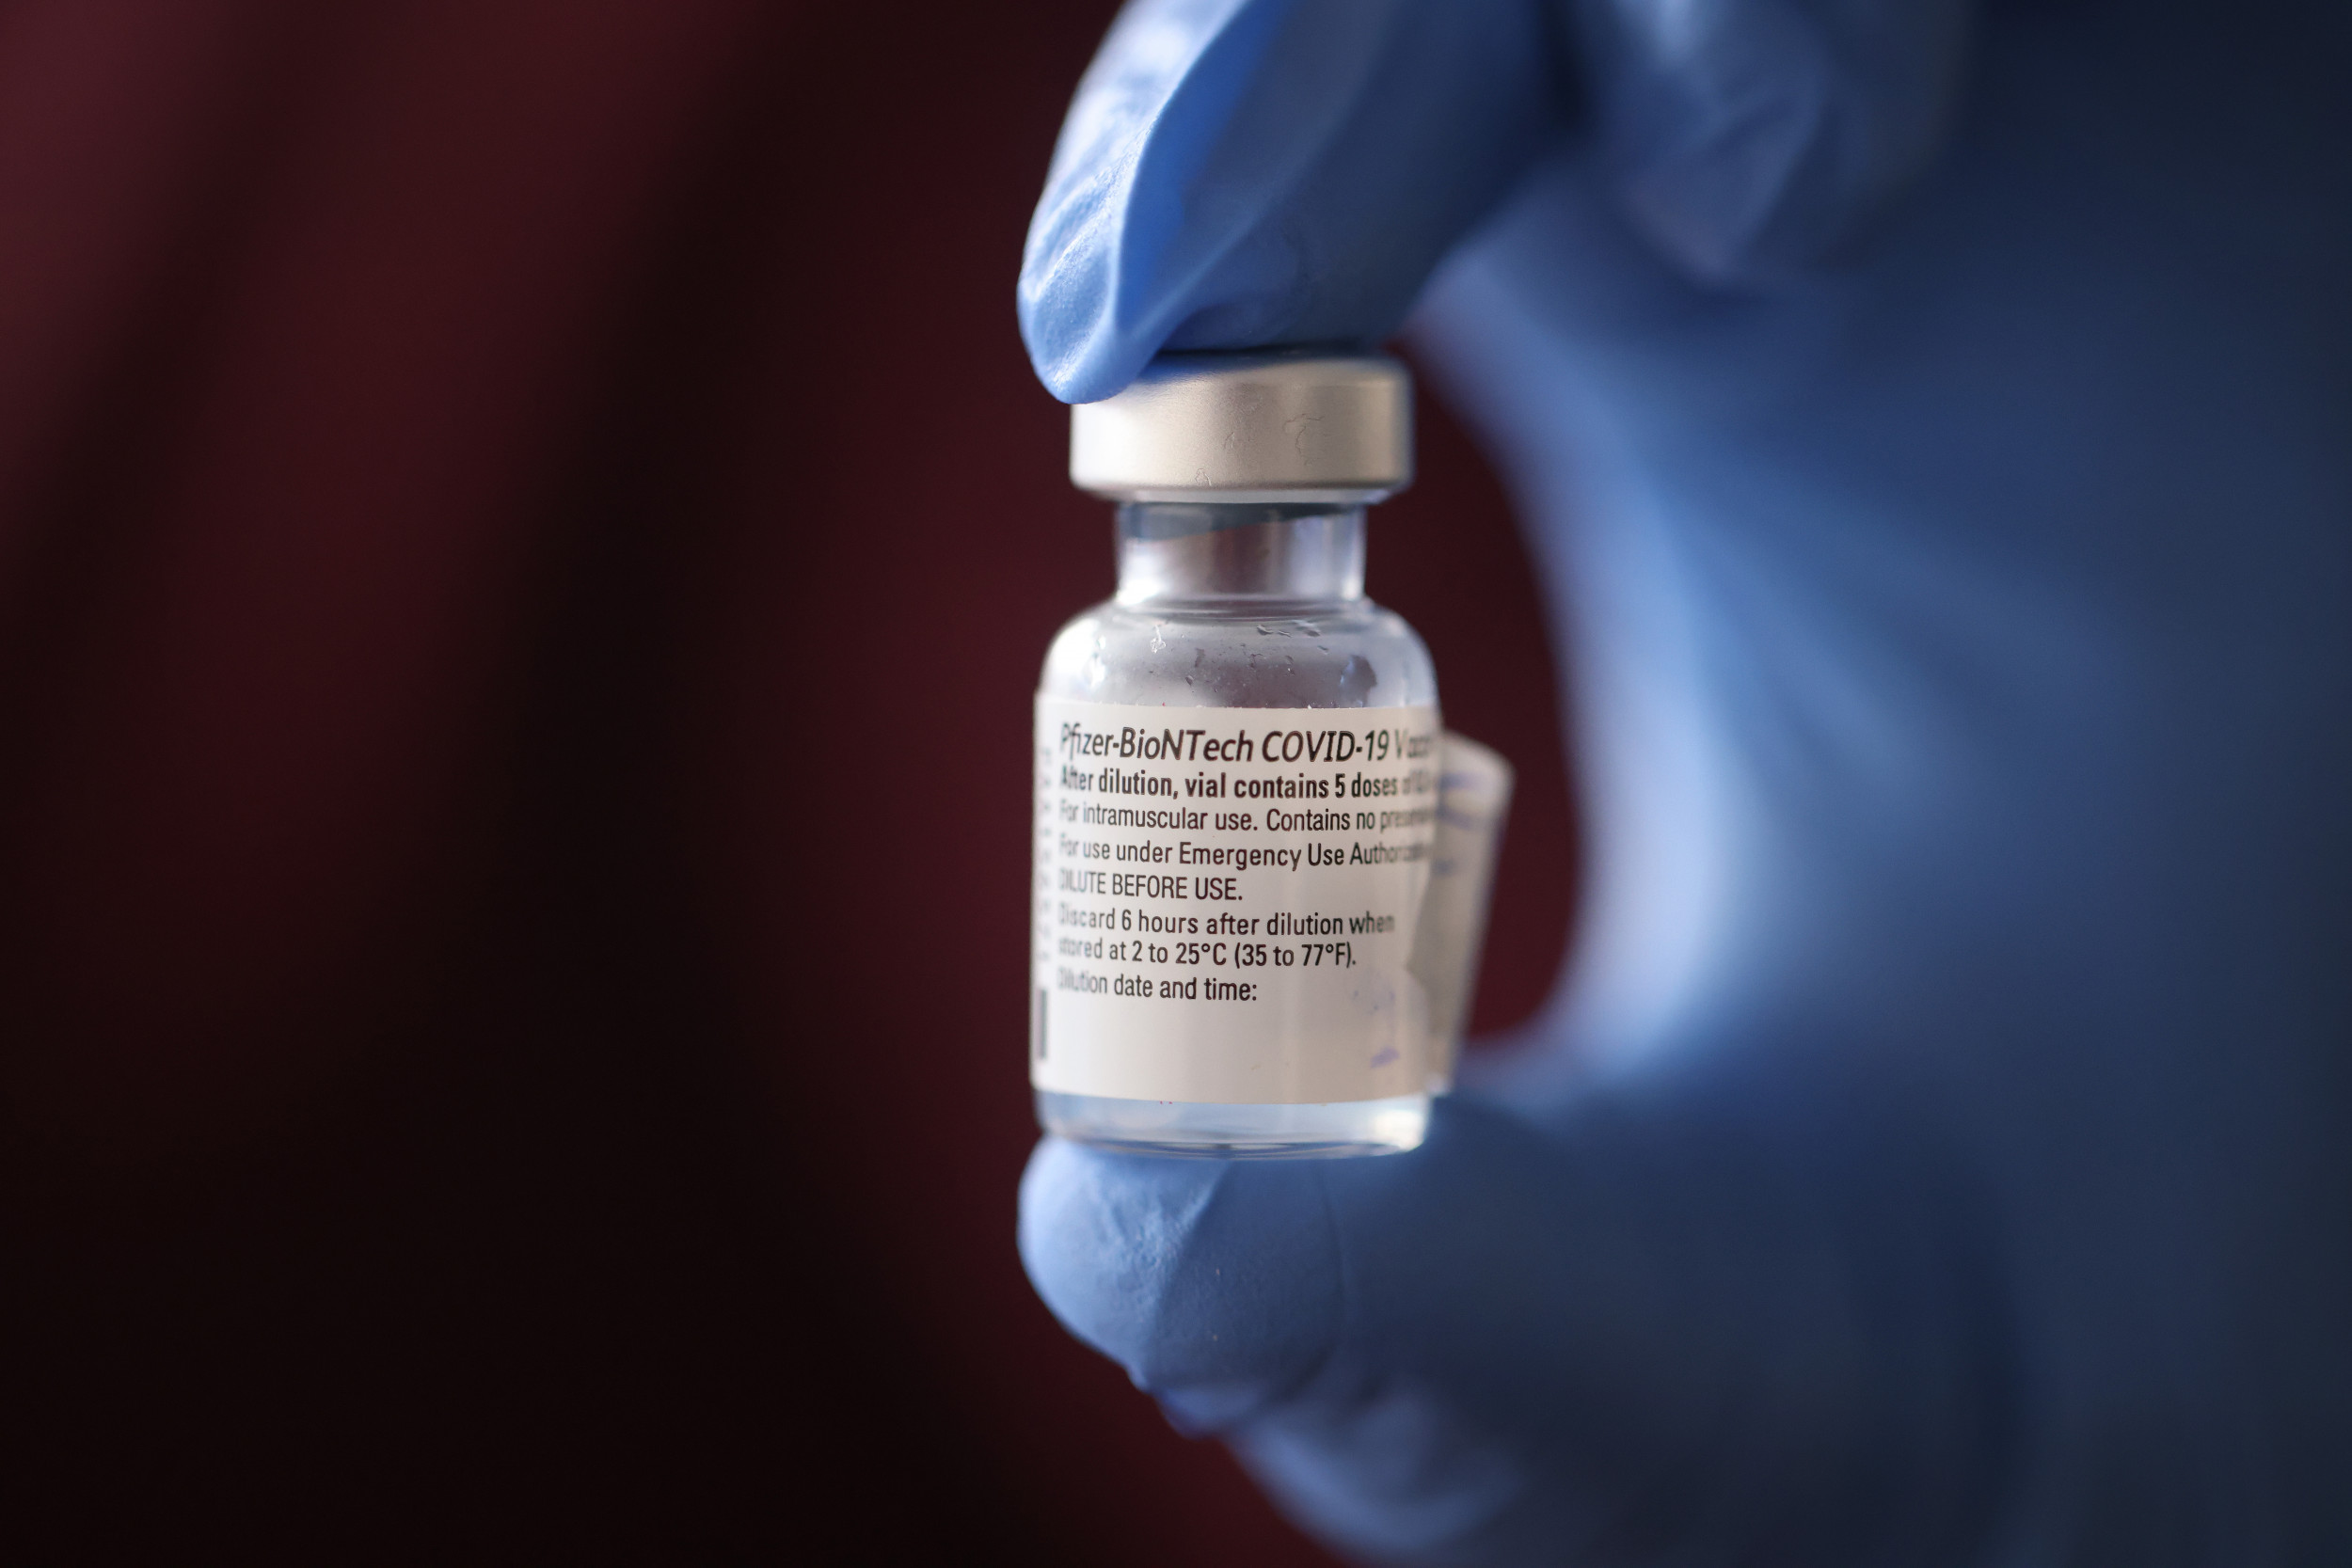 The CDC now recommends that those with pre-existing diseases be vaccinated against COVID-19